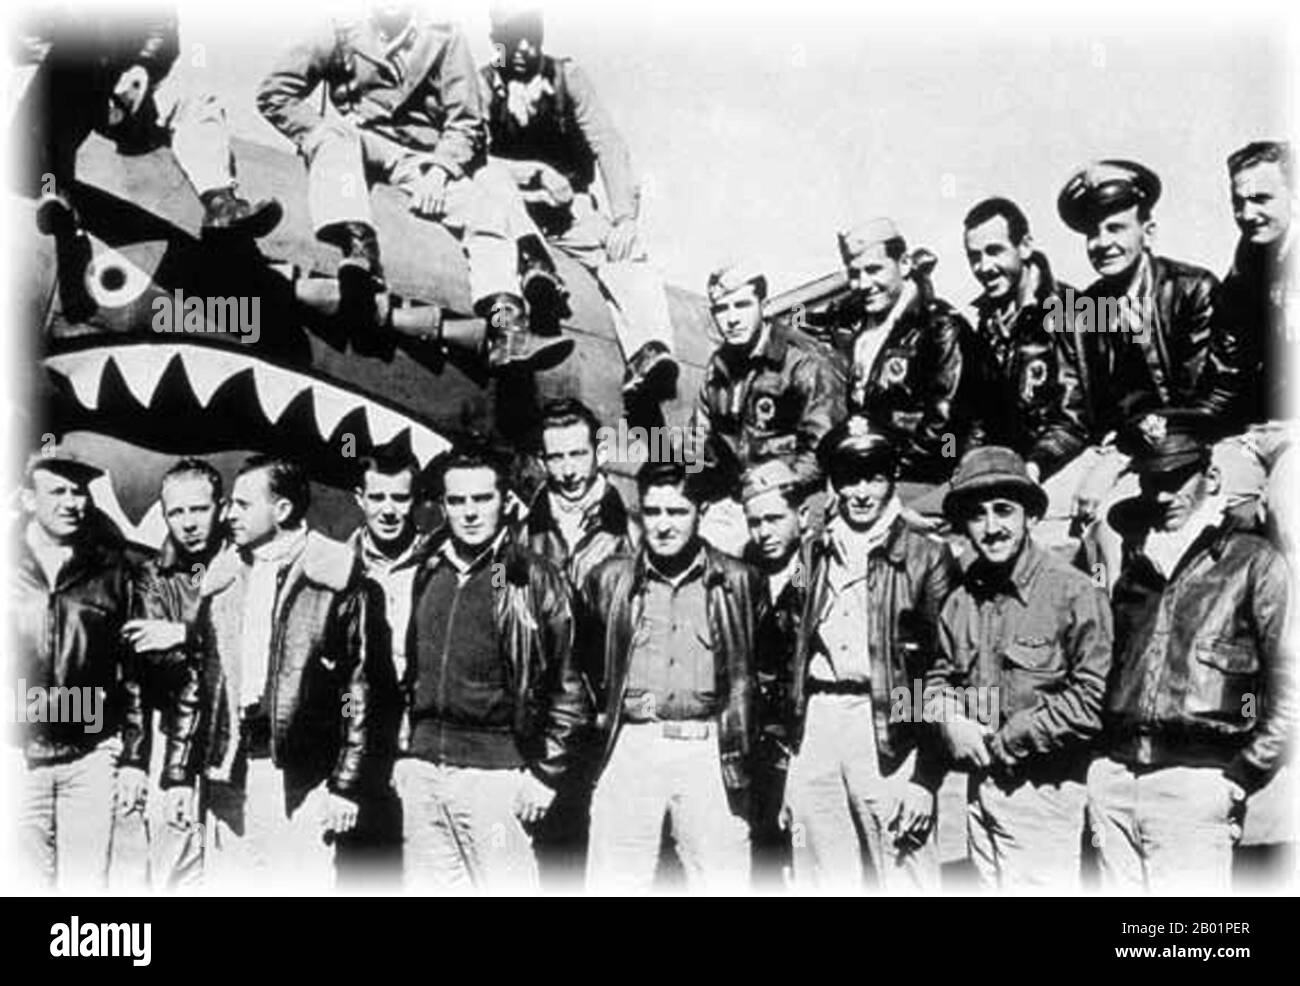 China/USA: A group of  'Flying Tigers' headquartered at the Kunming Wujiaba Airport, Yunnan, China, c. 1942-1944.  'Flying Tigers' was the popular name for the 1st American Volunteer Group (AVG) of the Chinese Air Force in 1941-1942. The pilots were United States Army (USAAF), Navy (USN), and Marine Corps (USMC) personnel, recruited under Presidential sanction and commanded by Claire Lee Chennault; the ground crew and headquarters staff were likewise mostly recruited from the U.S. military, along with some civilians. The group consisted of three fighter squadrons with about 20 aircraft each. Stock Photo